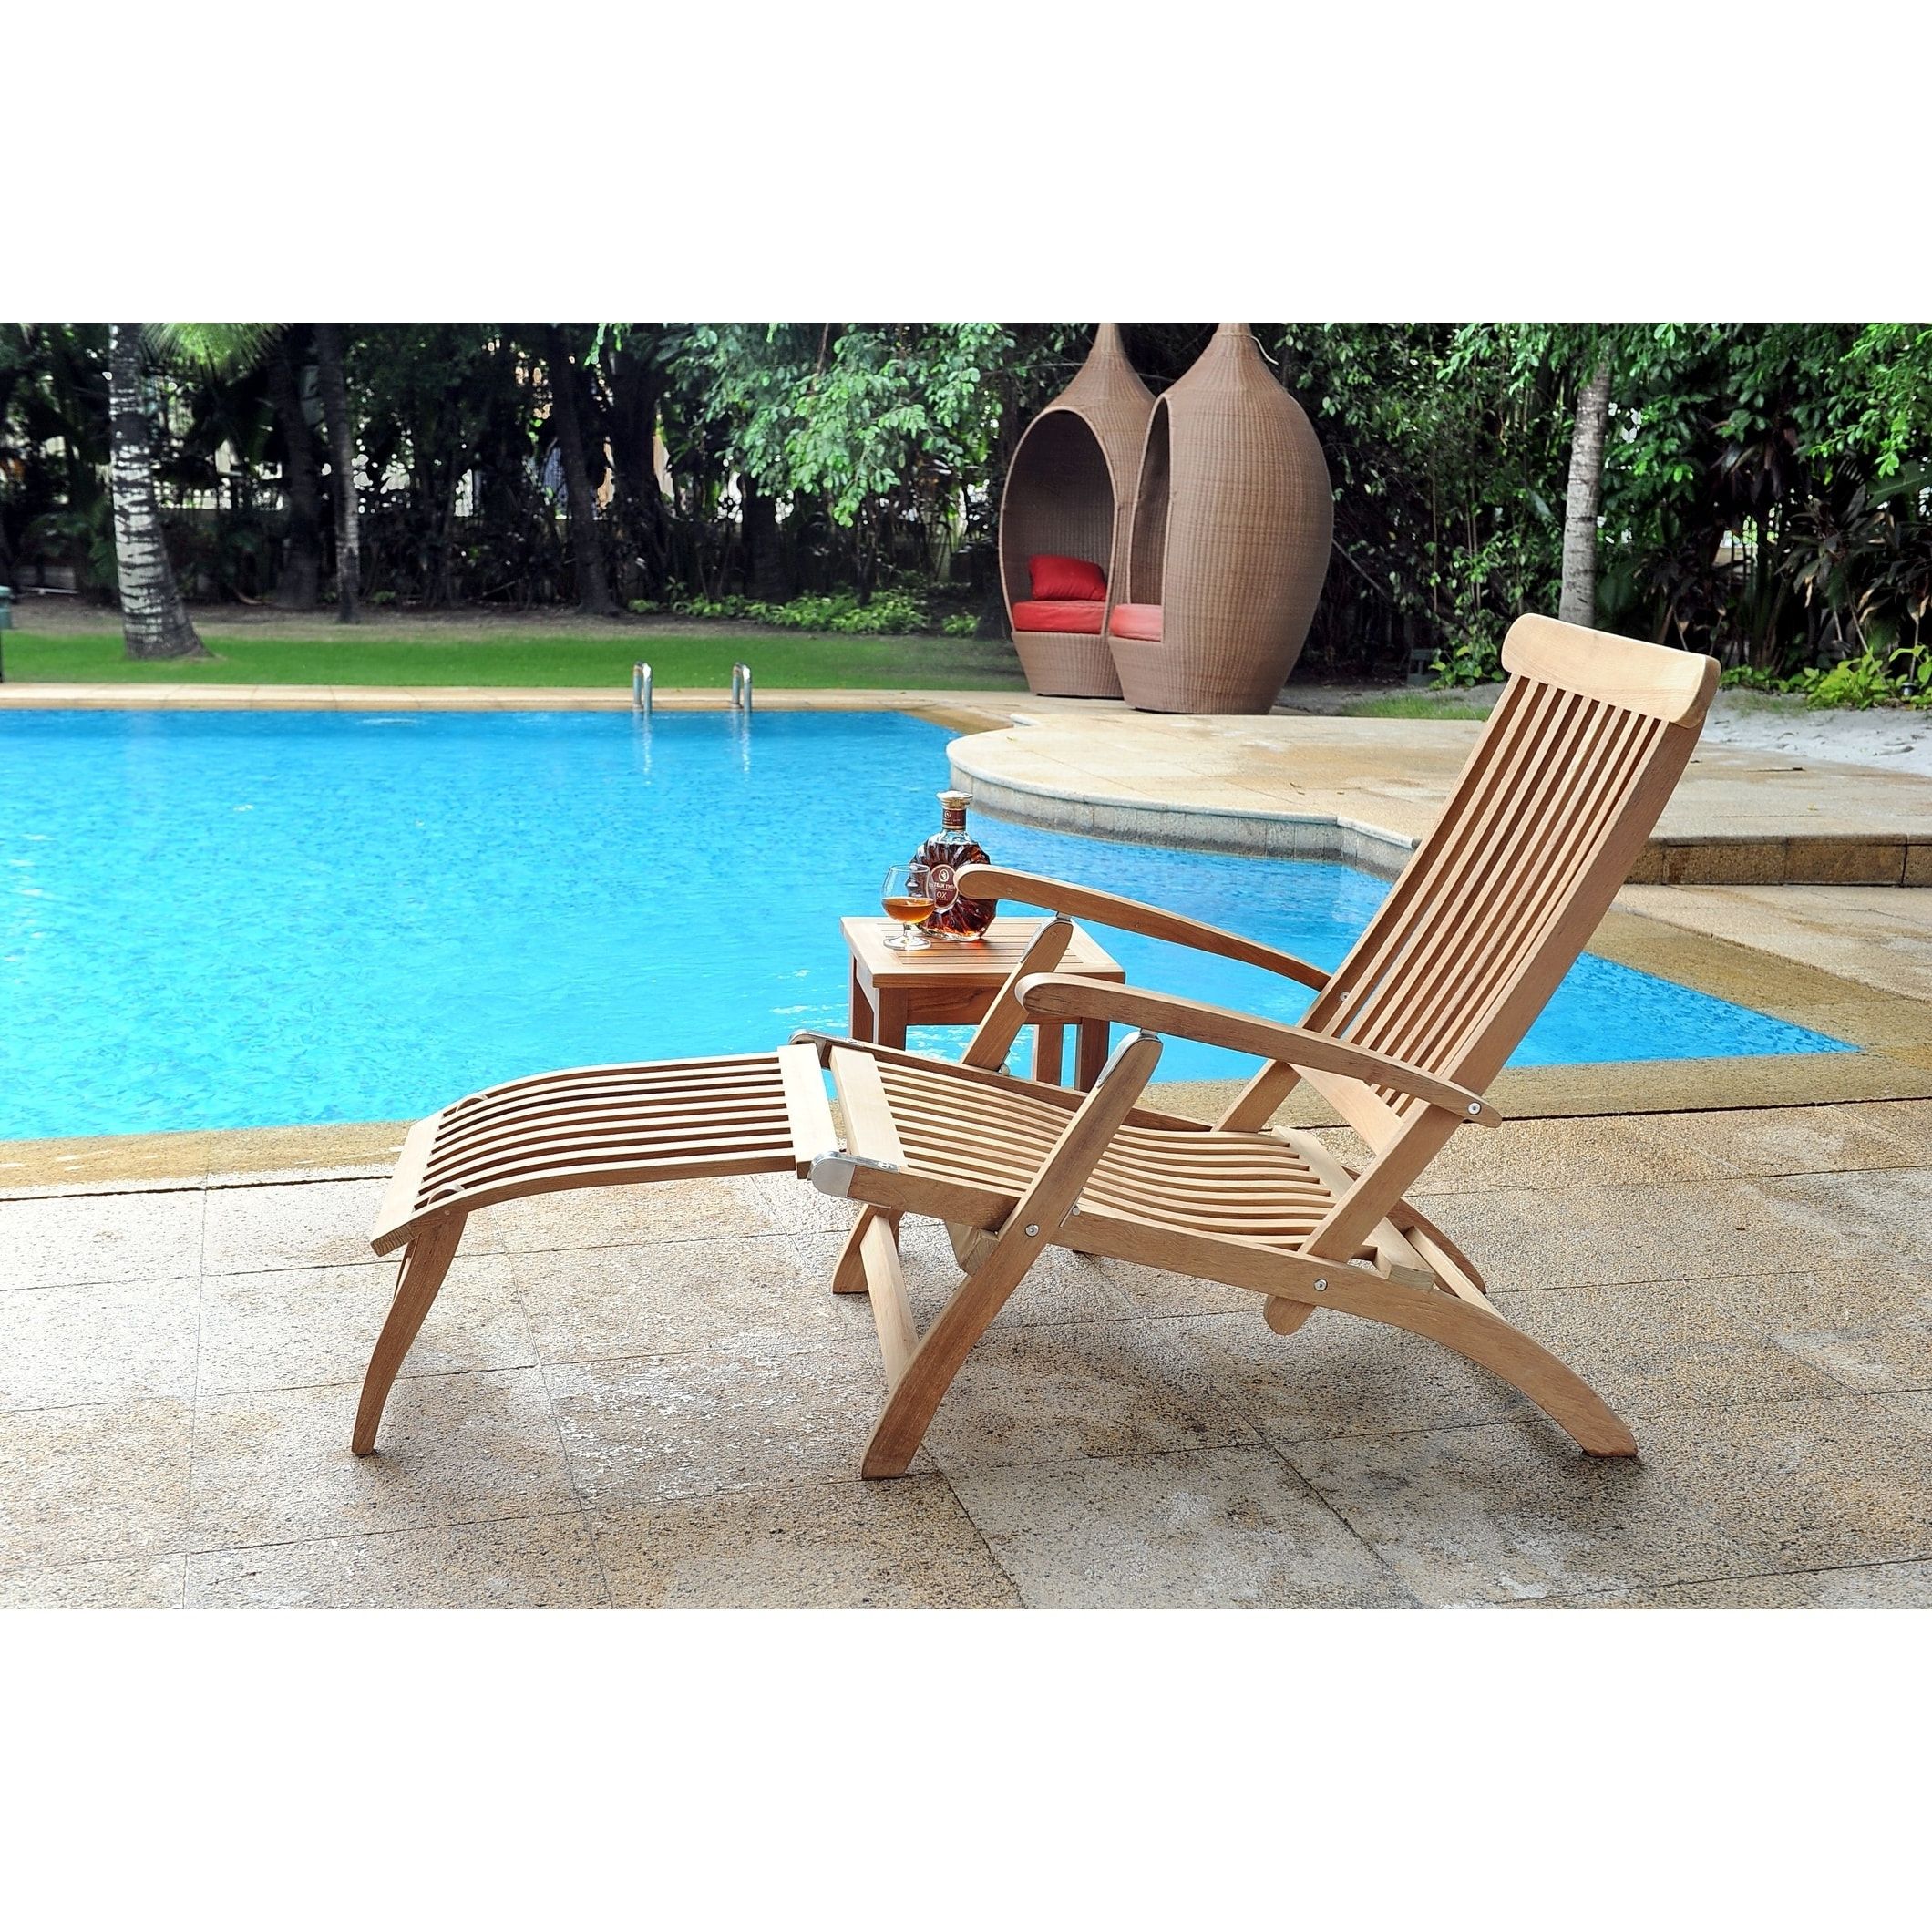 Most Current Teak Outdoor Folding Armchairs Regarding Hiteak Steamer Outdoor Folding Teak Chaise Lounge Chair – Walmart (View 4 of 15)